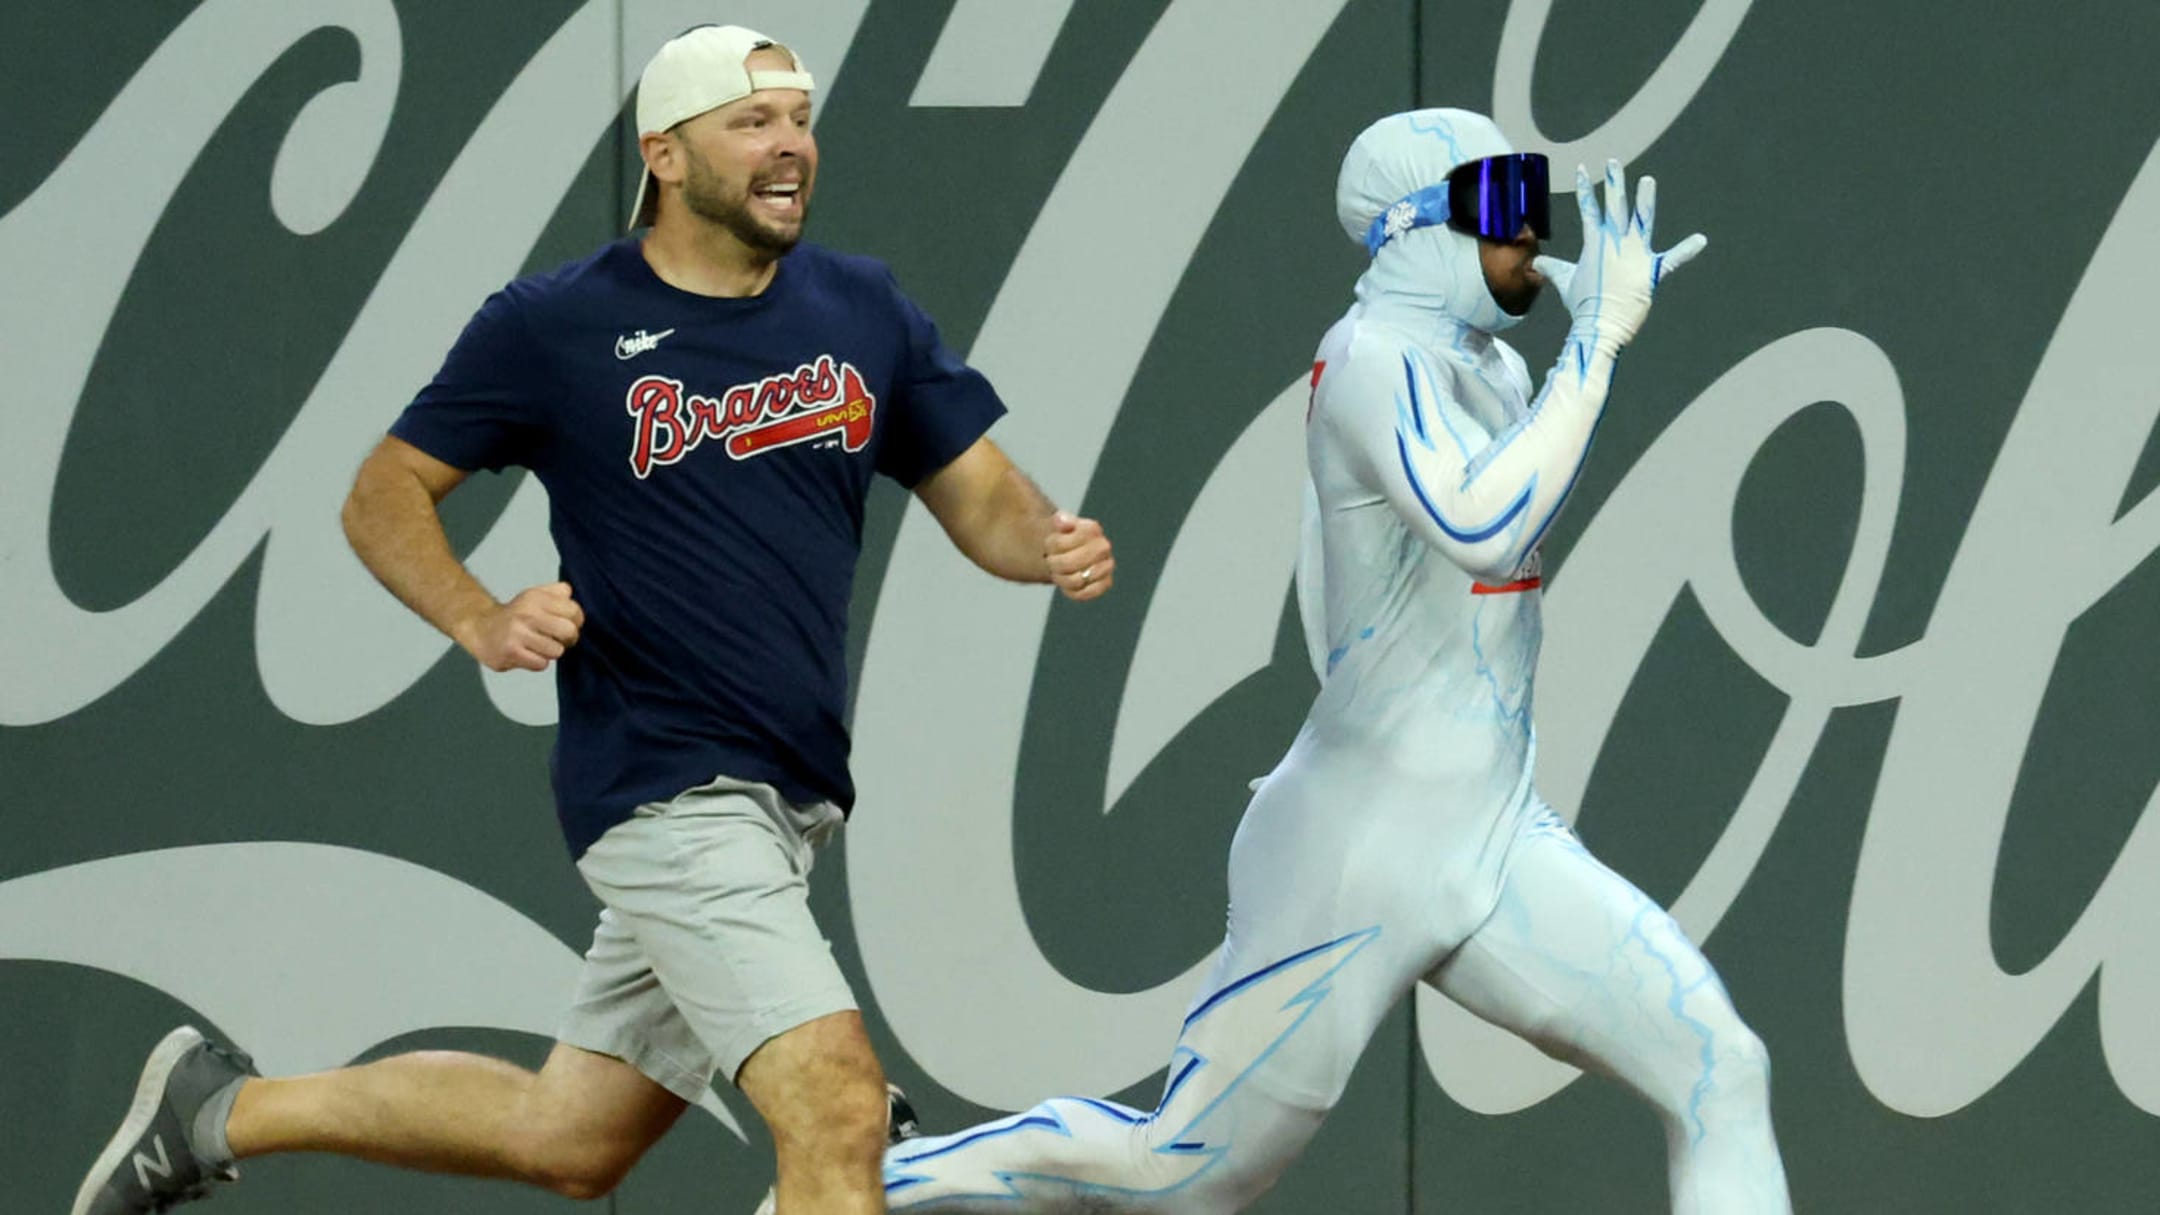 Braves fan stumbles near finish line, falls inches short of beating 'The  Freeze' in foot race